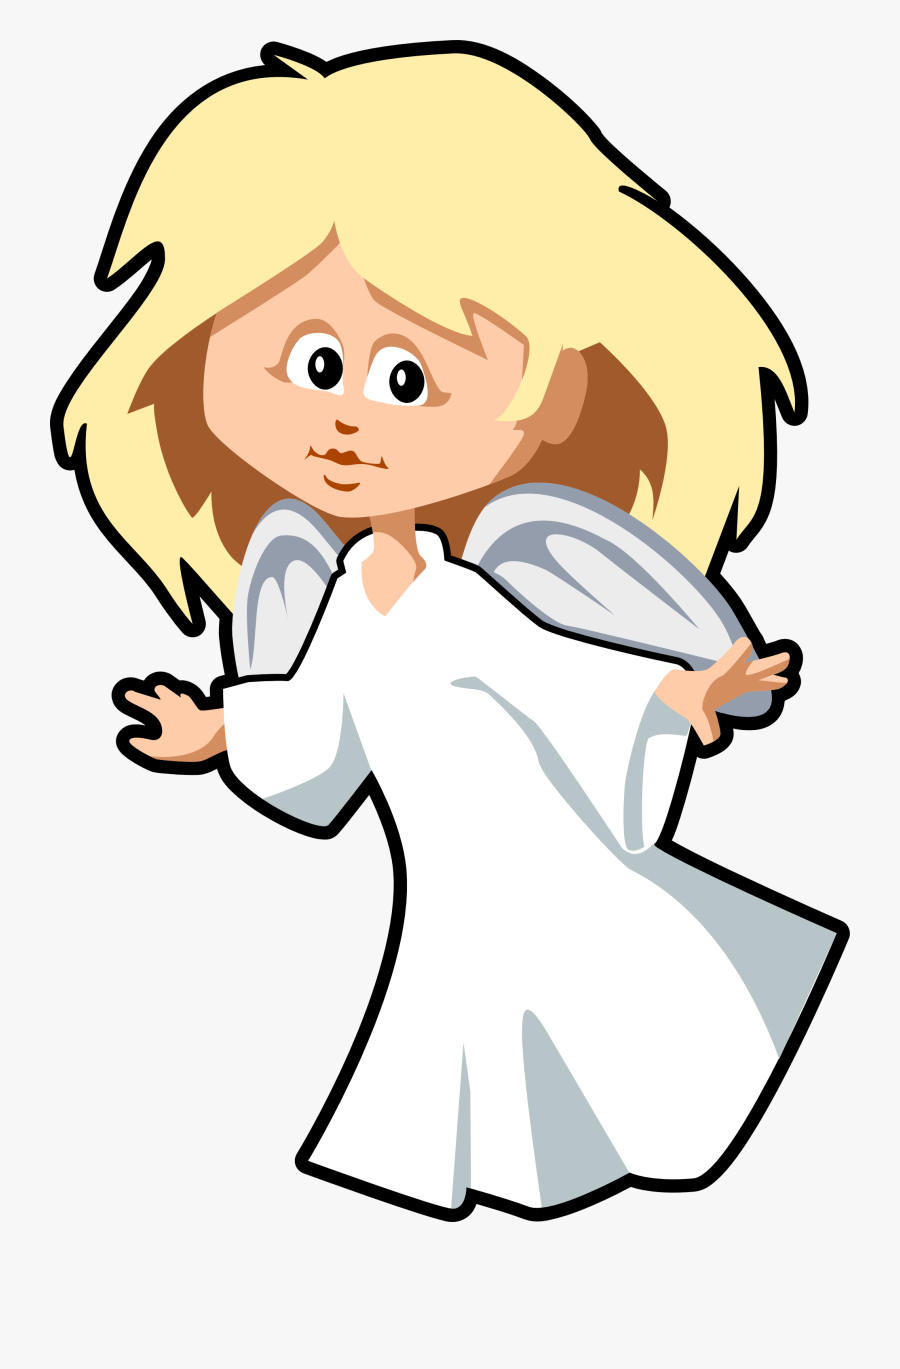 Angel Clipart Free Graphics Of Cherubs And Angels - Cartoon Angel Transparent Background, Transparent Clipart